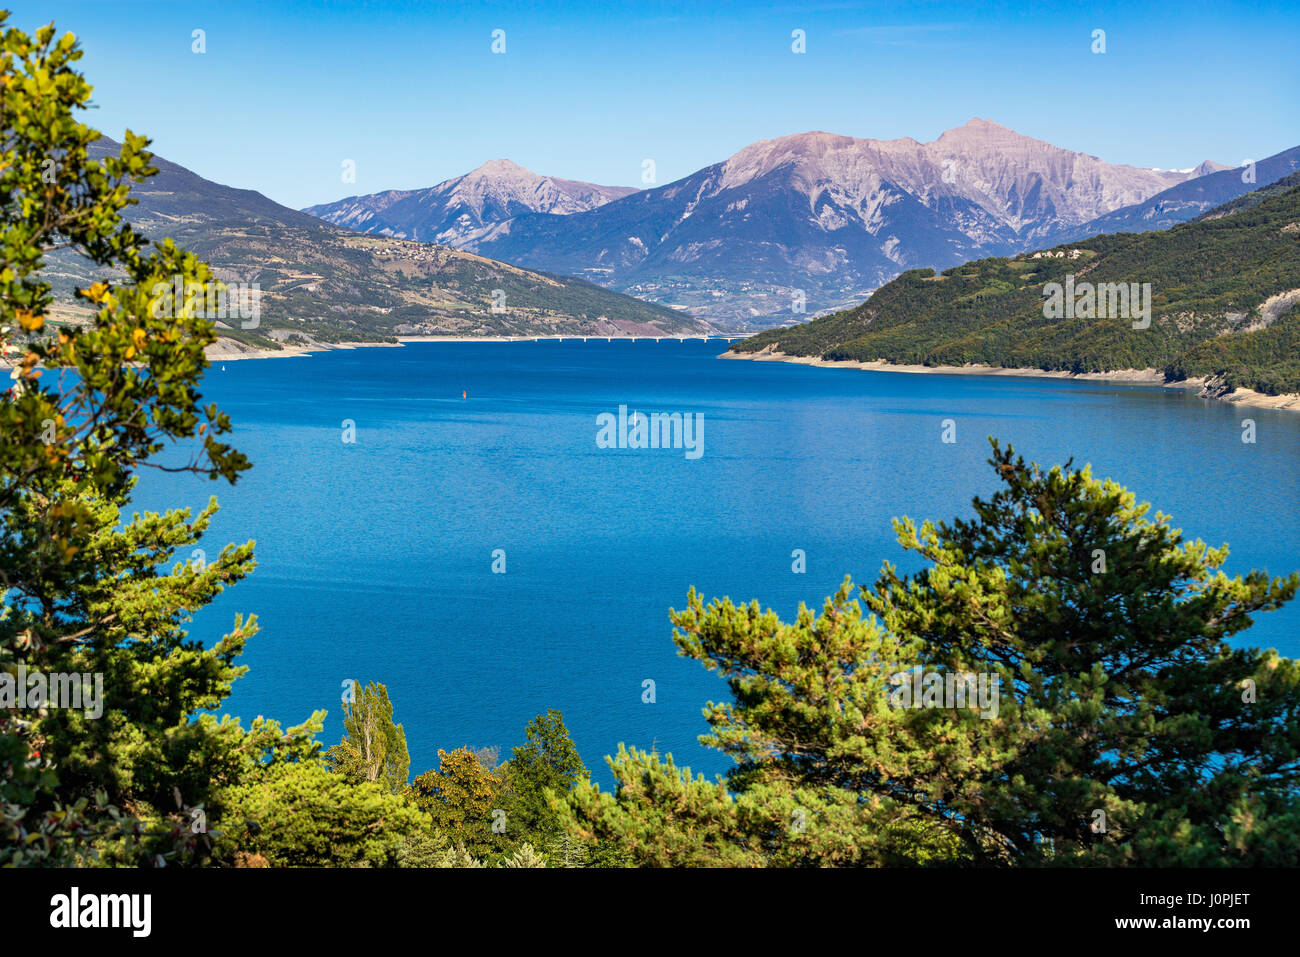 Serre-Poncon lake in Summer with the Savines-le-Lac bridge in the distance. Hautes-Alpes, Paca region, Souther French Alps, France Stock Photo